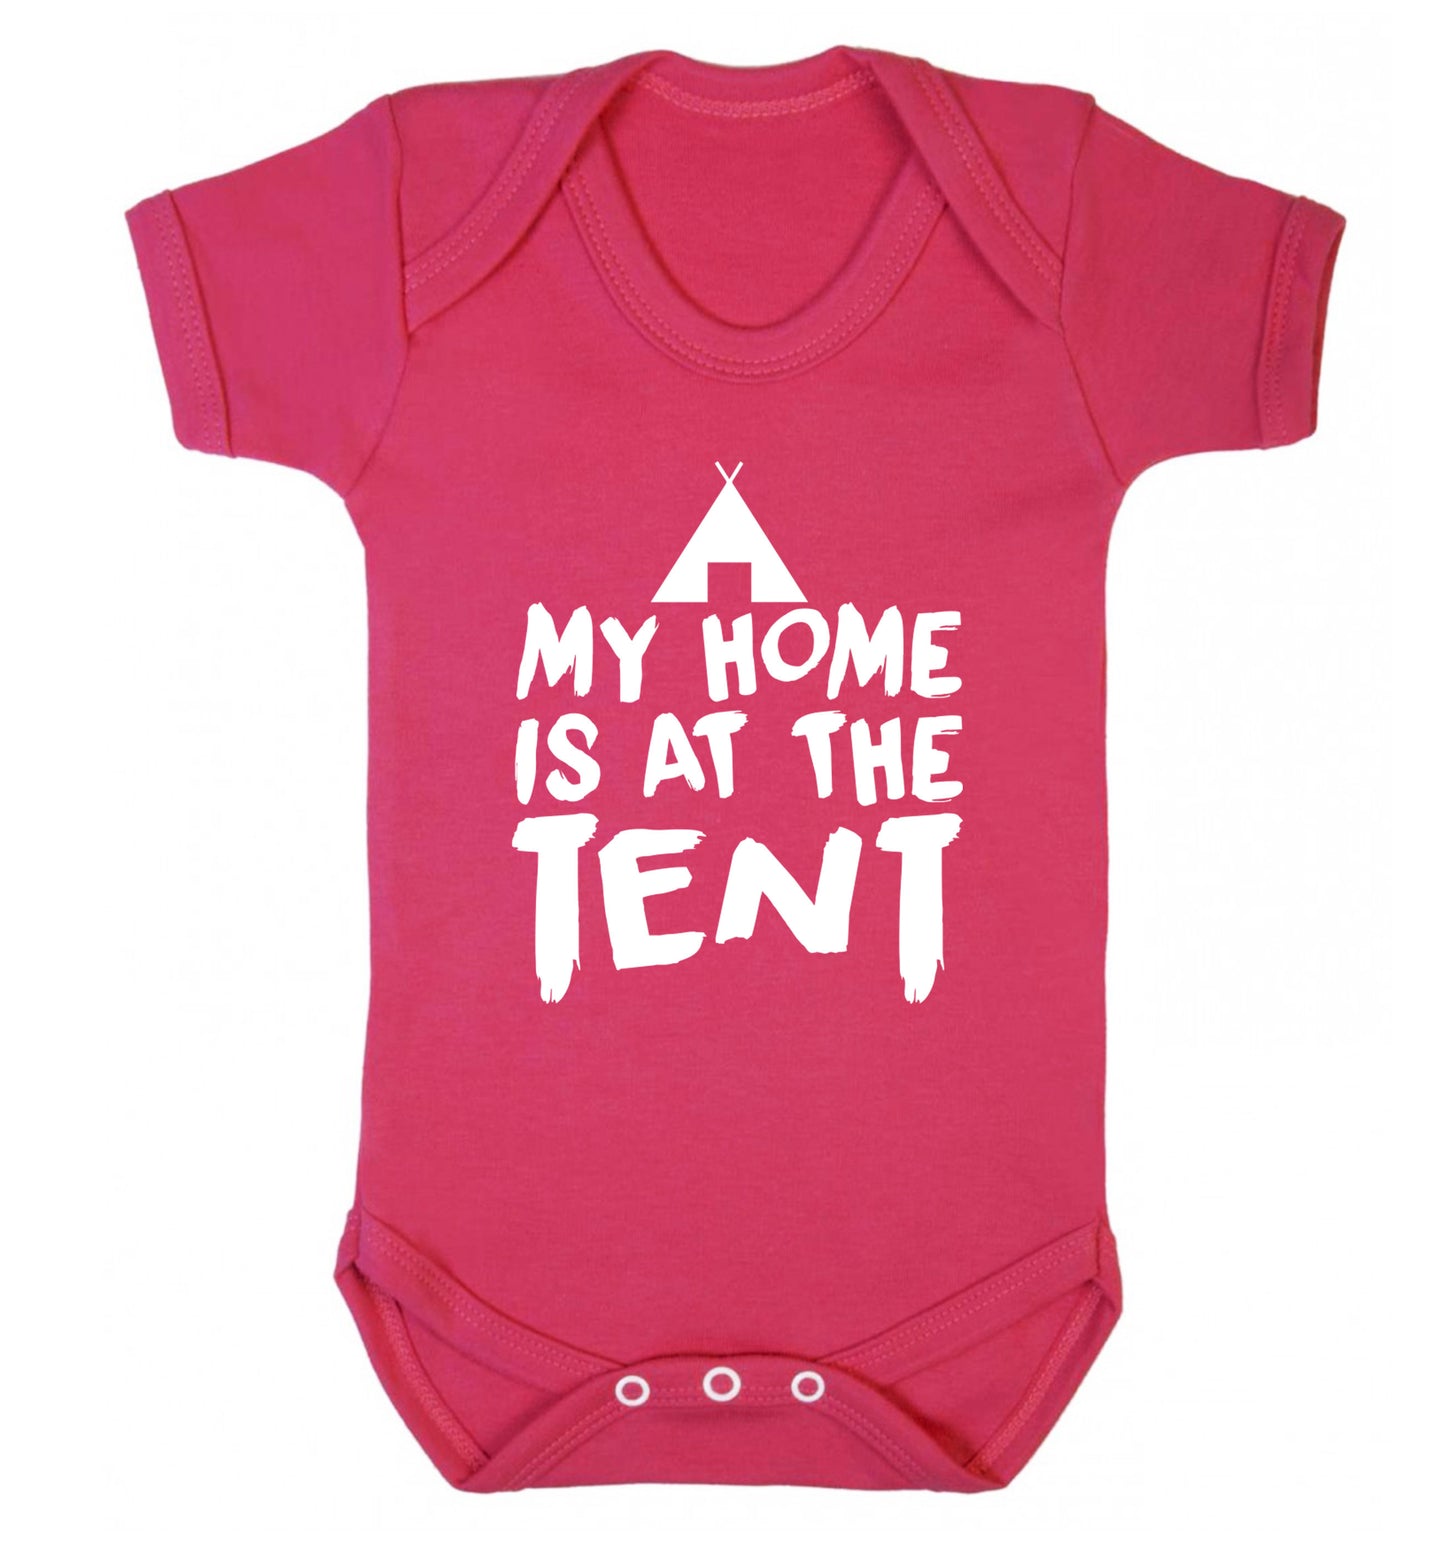 My home is at the tent Baby Vest dark pink 18-24 months